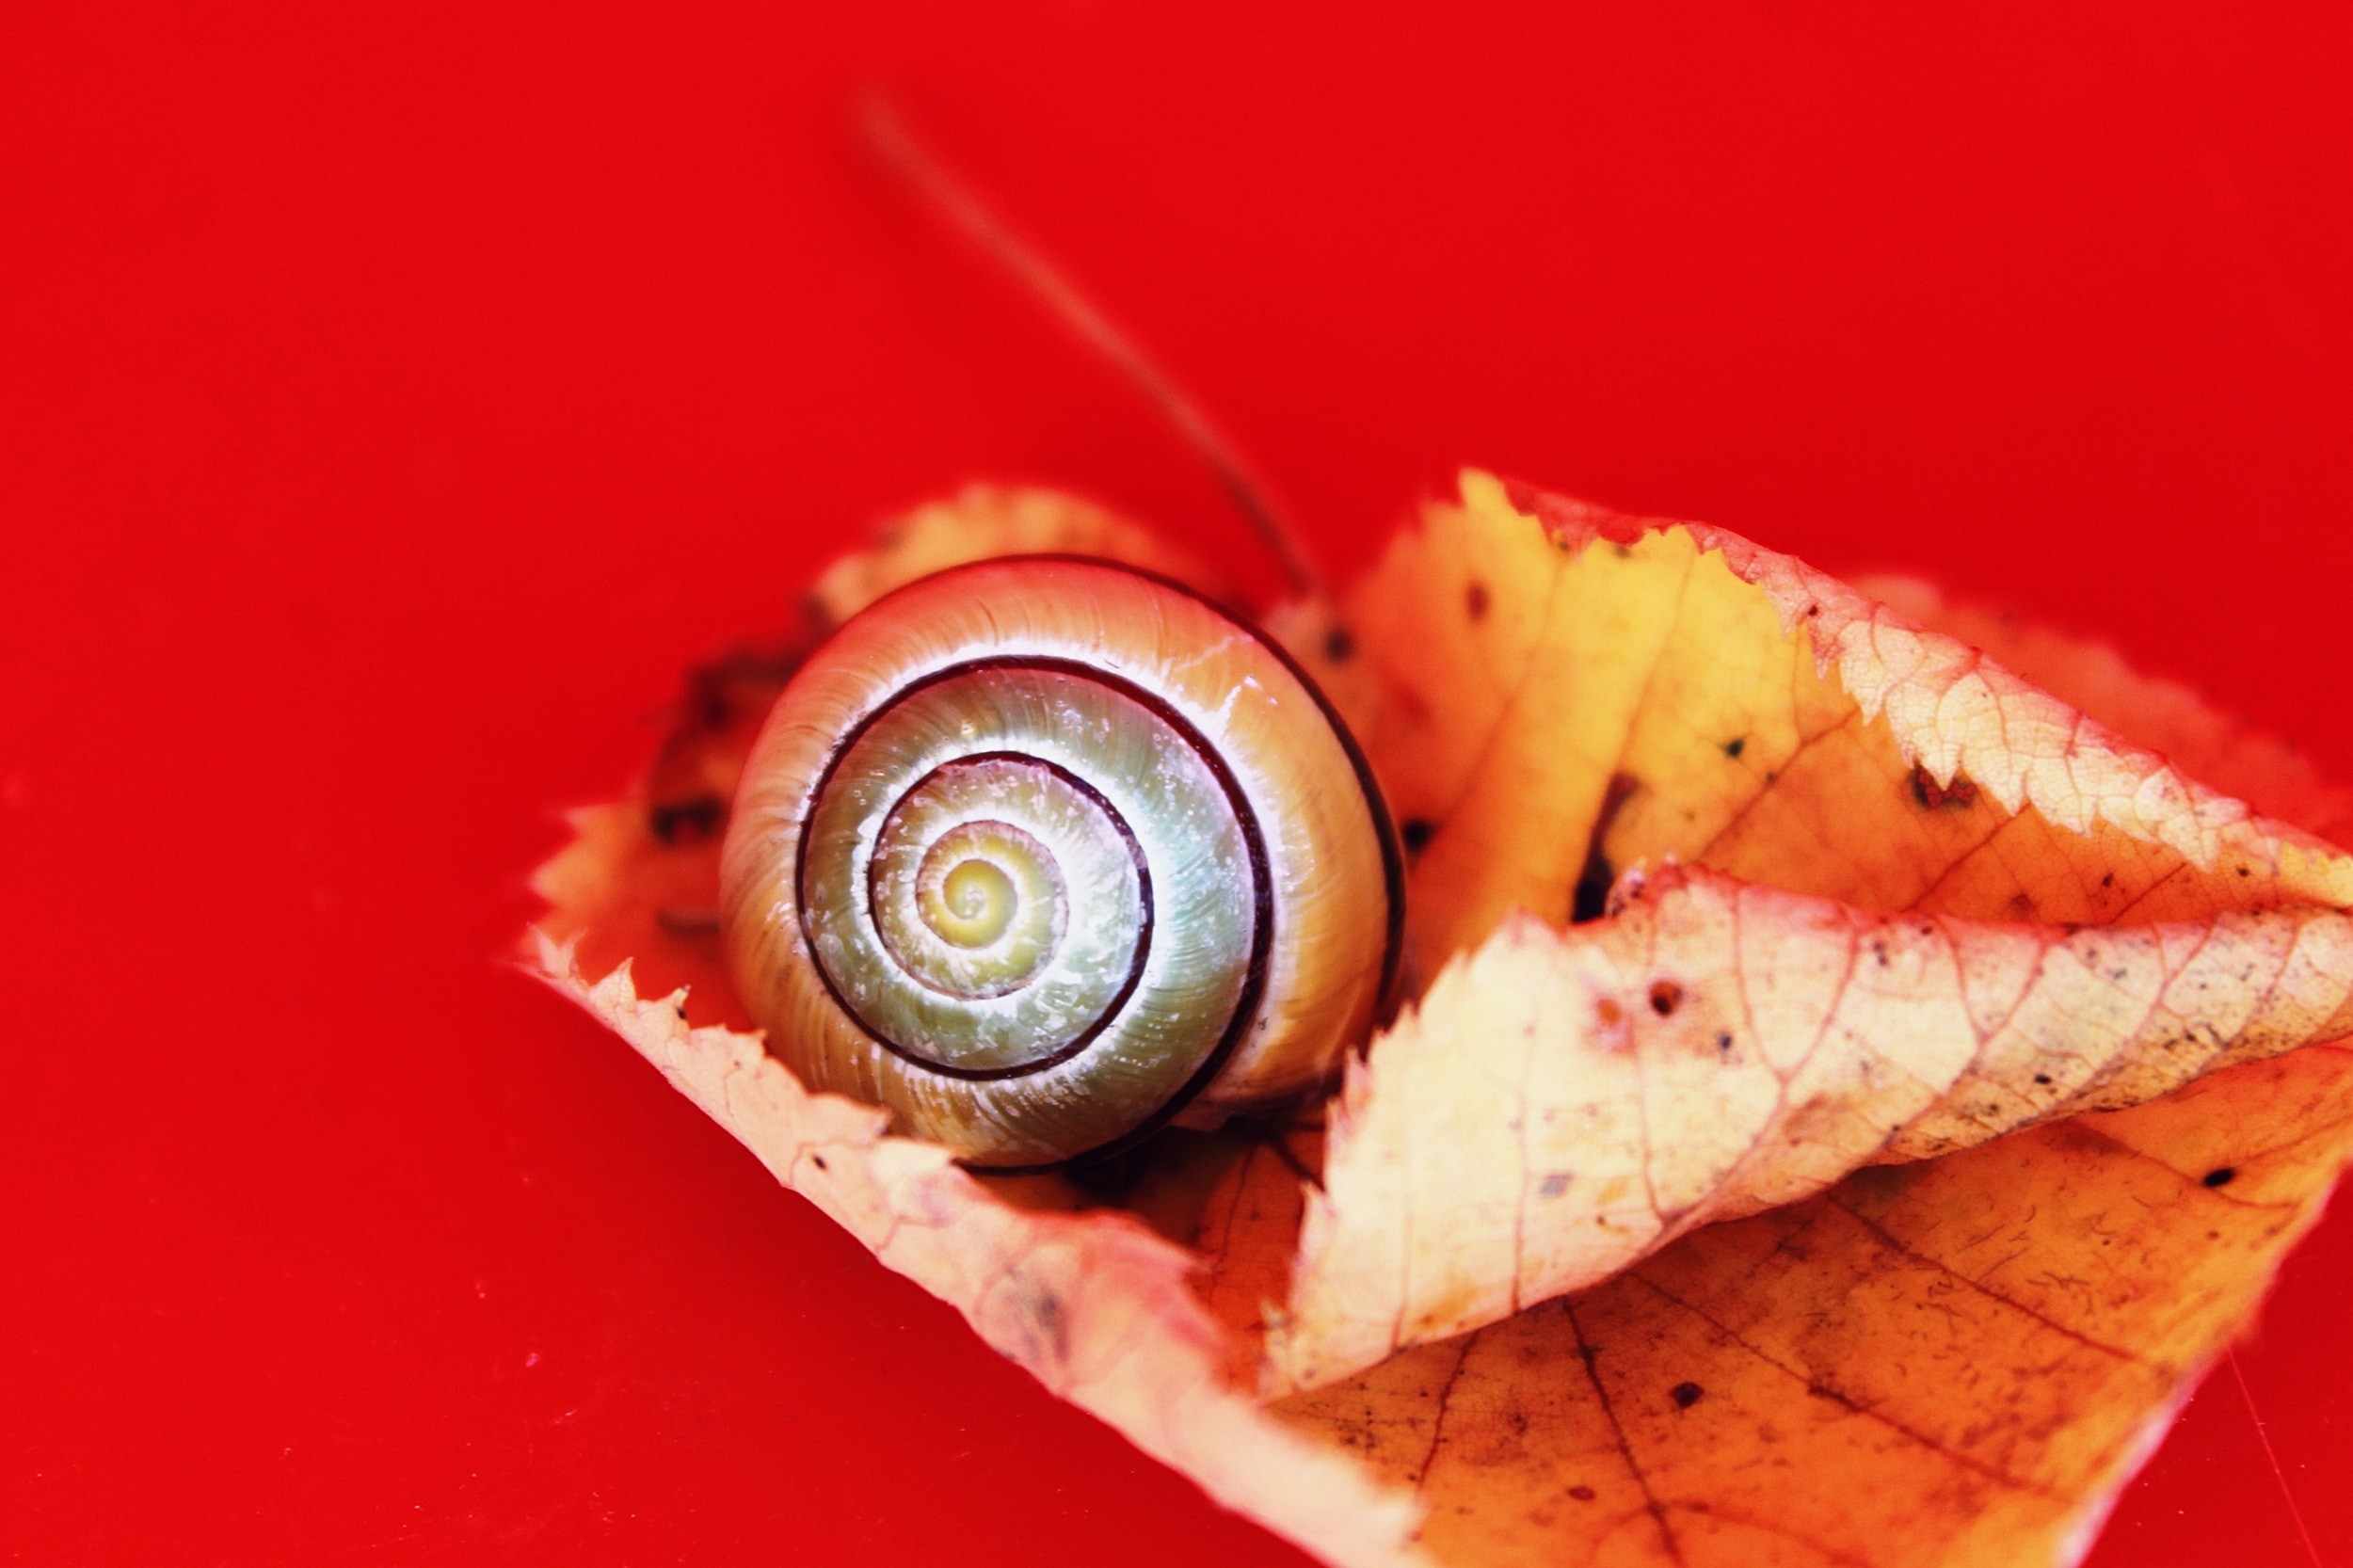 gray and brown snail